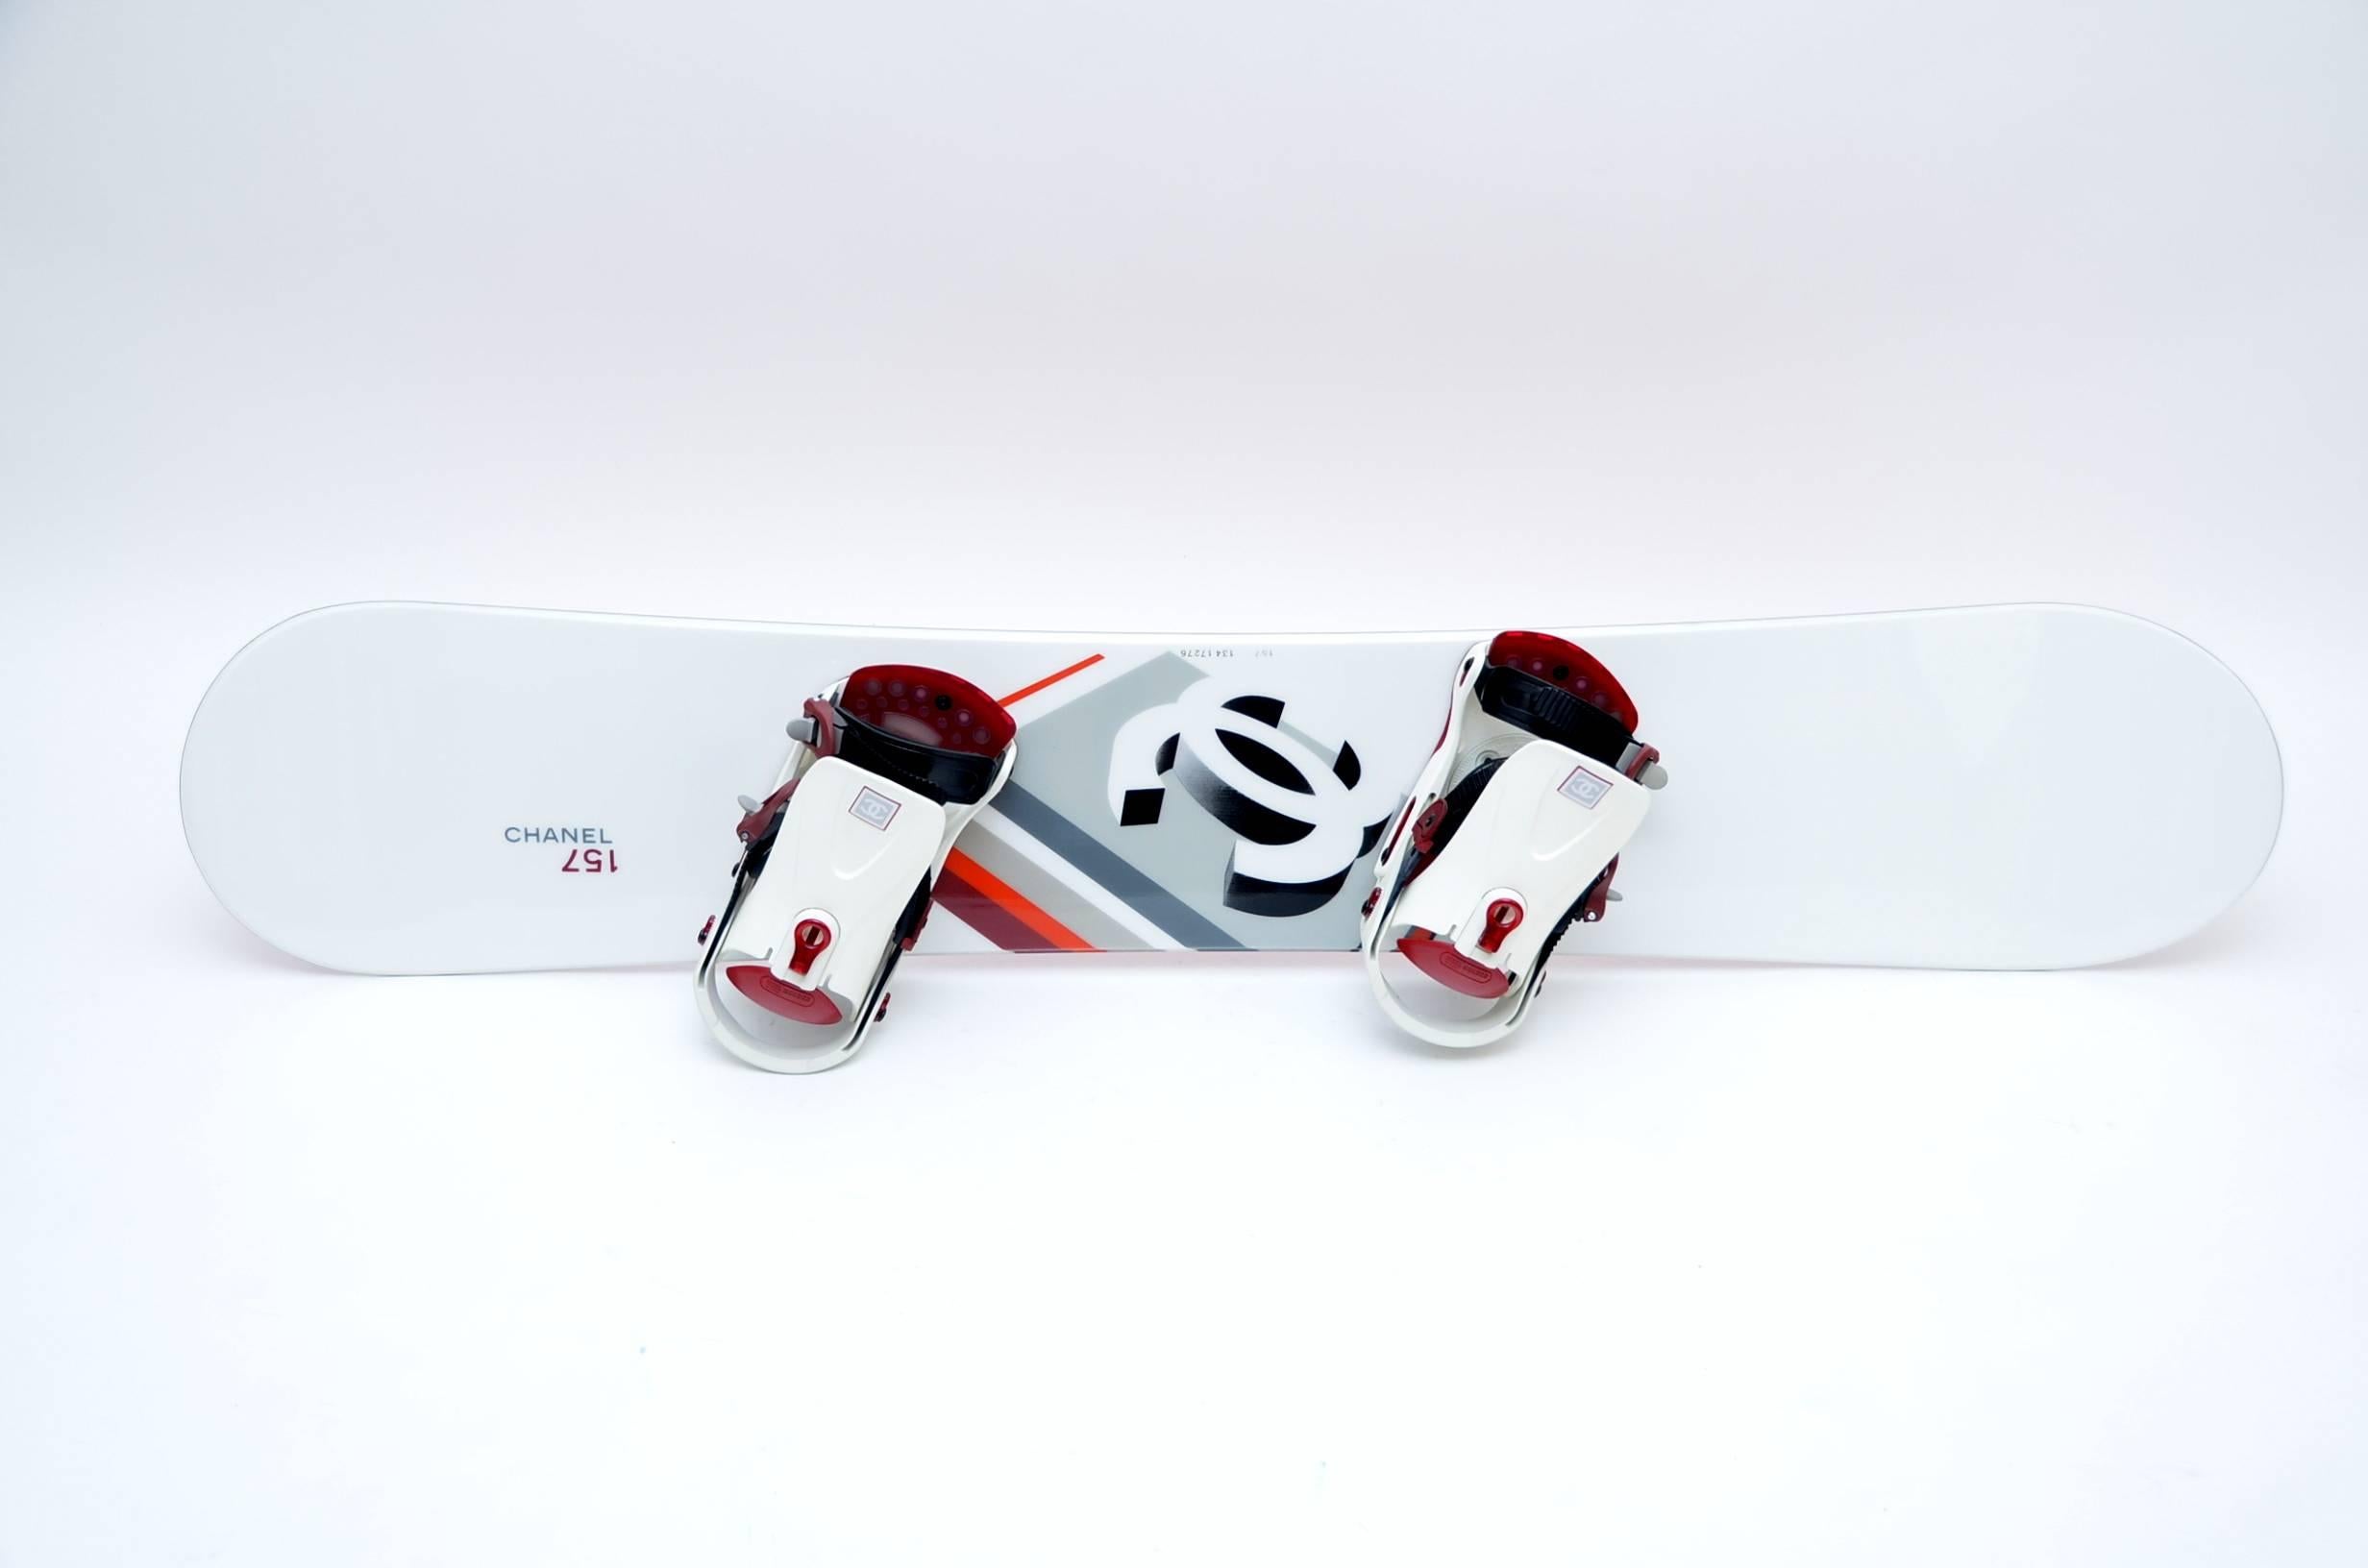 Very rare to find in this new condition Chanel snowboard with white  front and  graphic design feature  at center with iconic Chanel logo. Red underside features Chanel logo. Quilted travel case and red/white bindings included; both feature Chanel